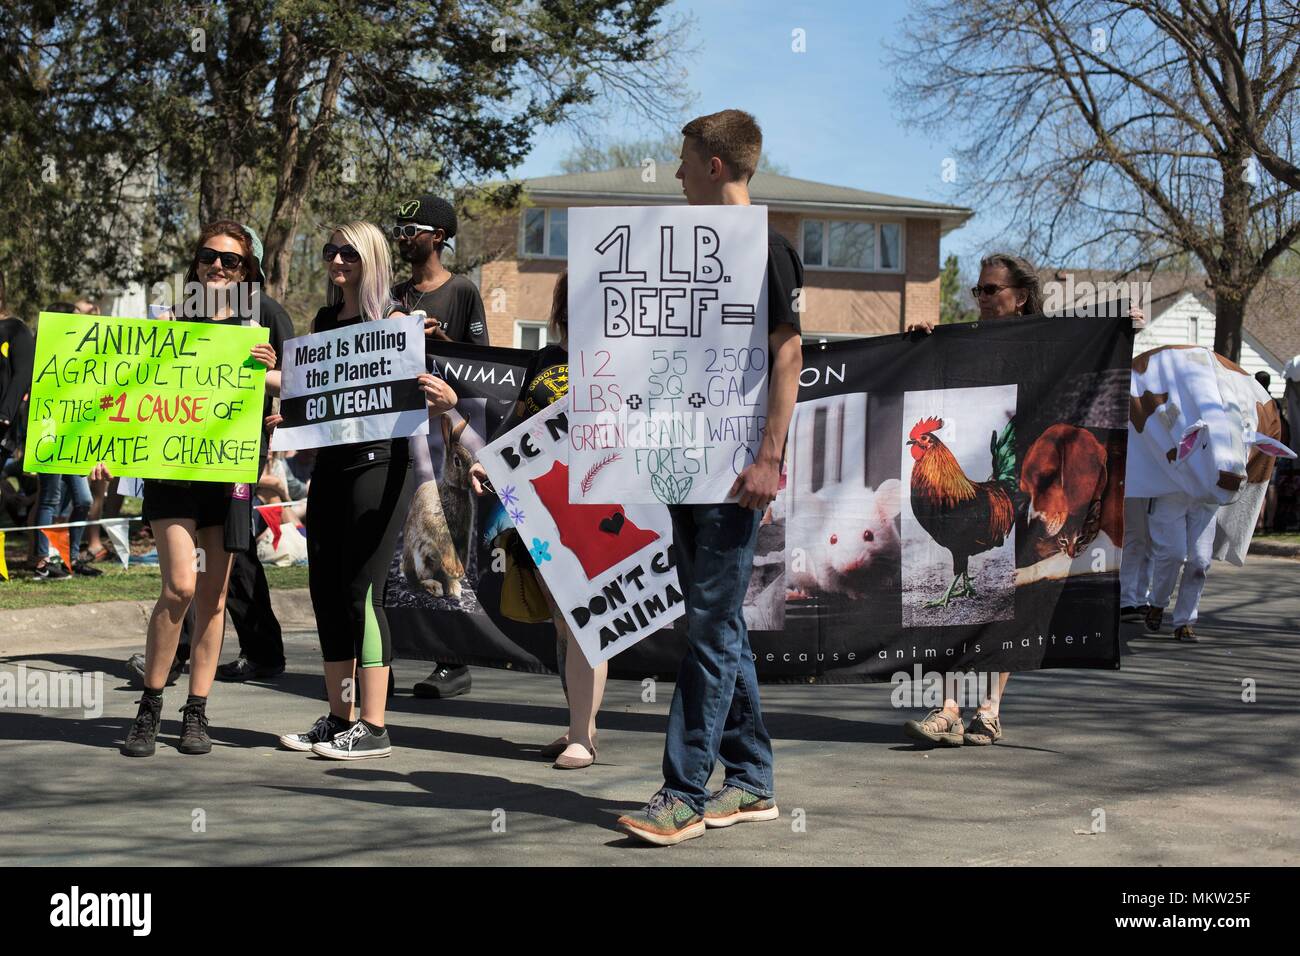 Animal Rights Protesters am Tag der Parade und Festival in Minneapolis, Minnesota, USA. Stockfoto